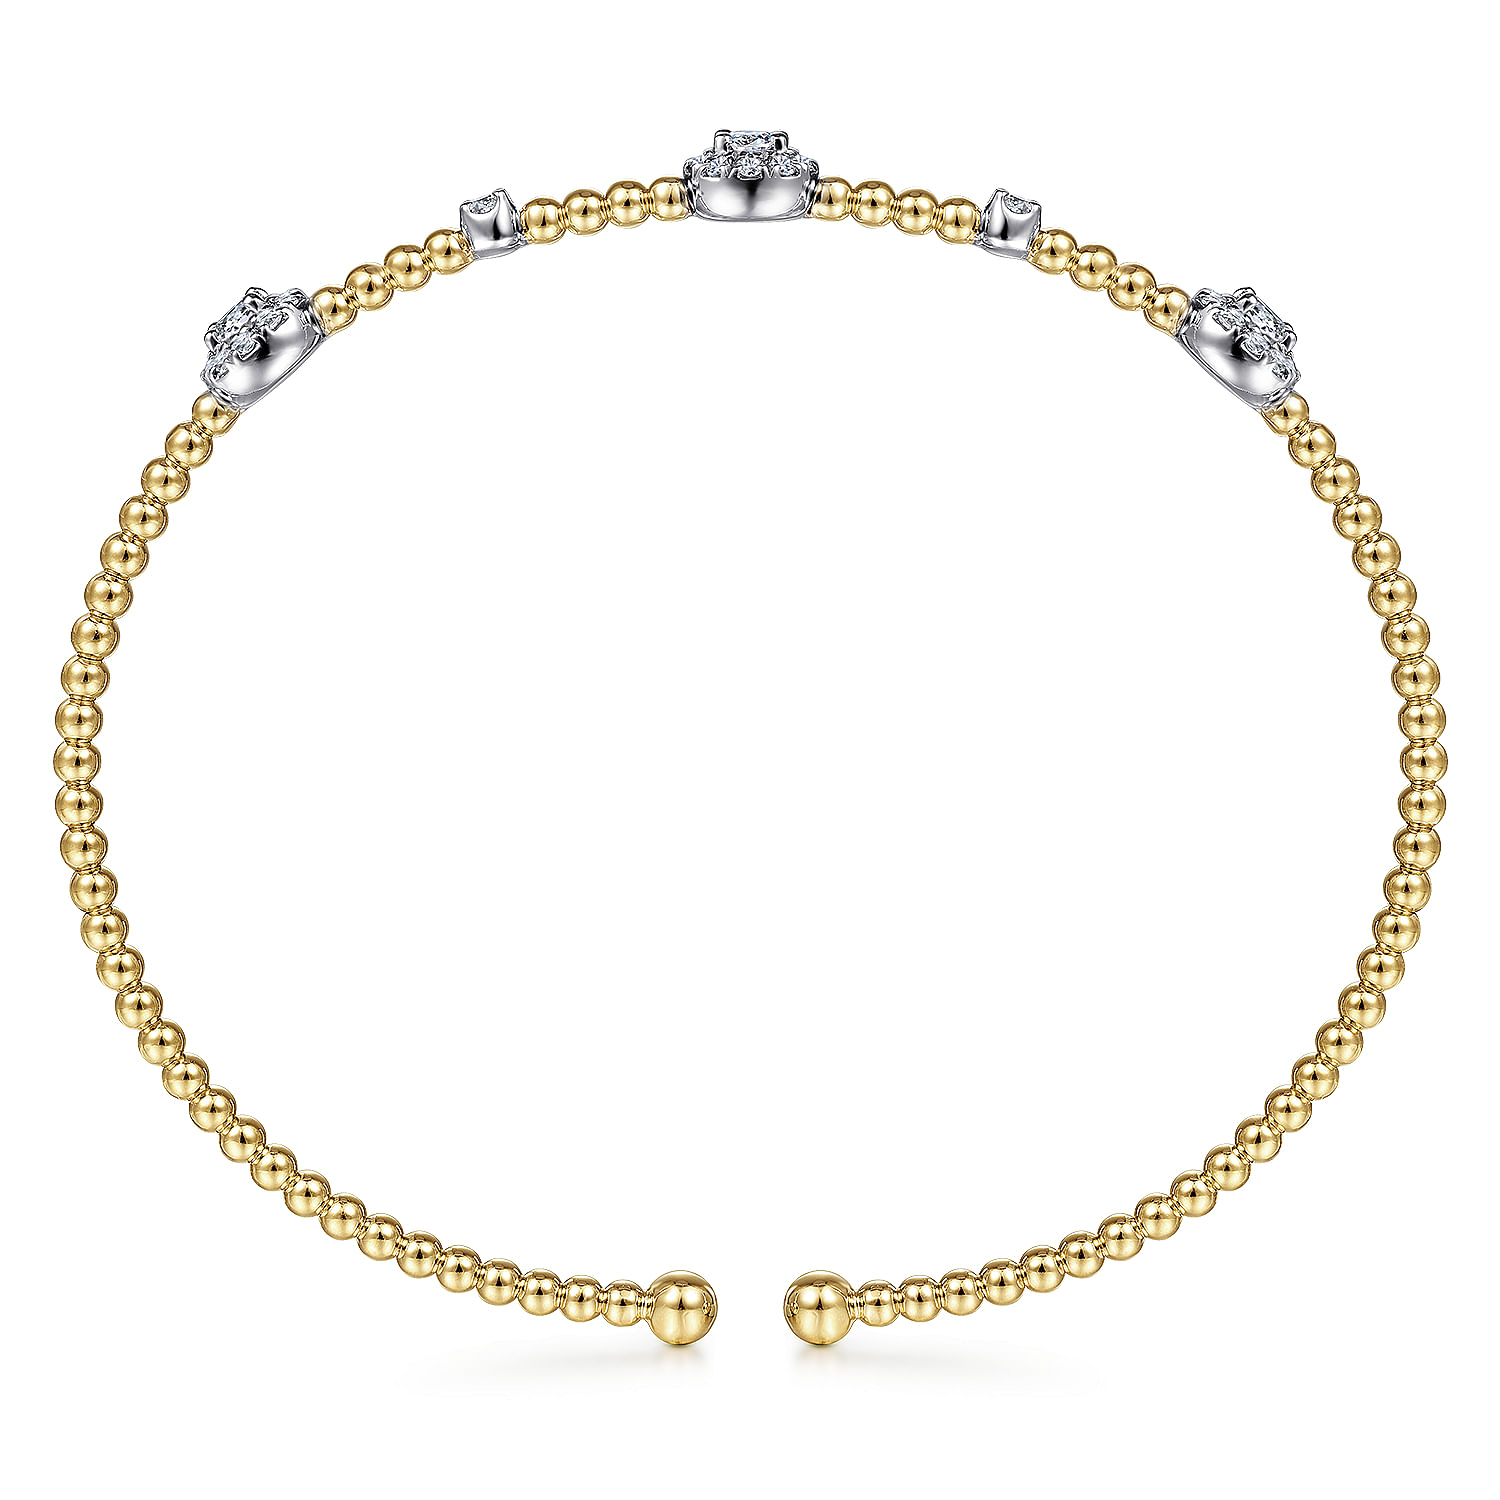 14K White-Yellow Gold Bujukan Bead Cuff Bracelet with Diamond Cluster Stations